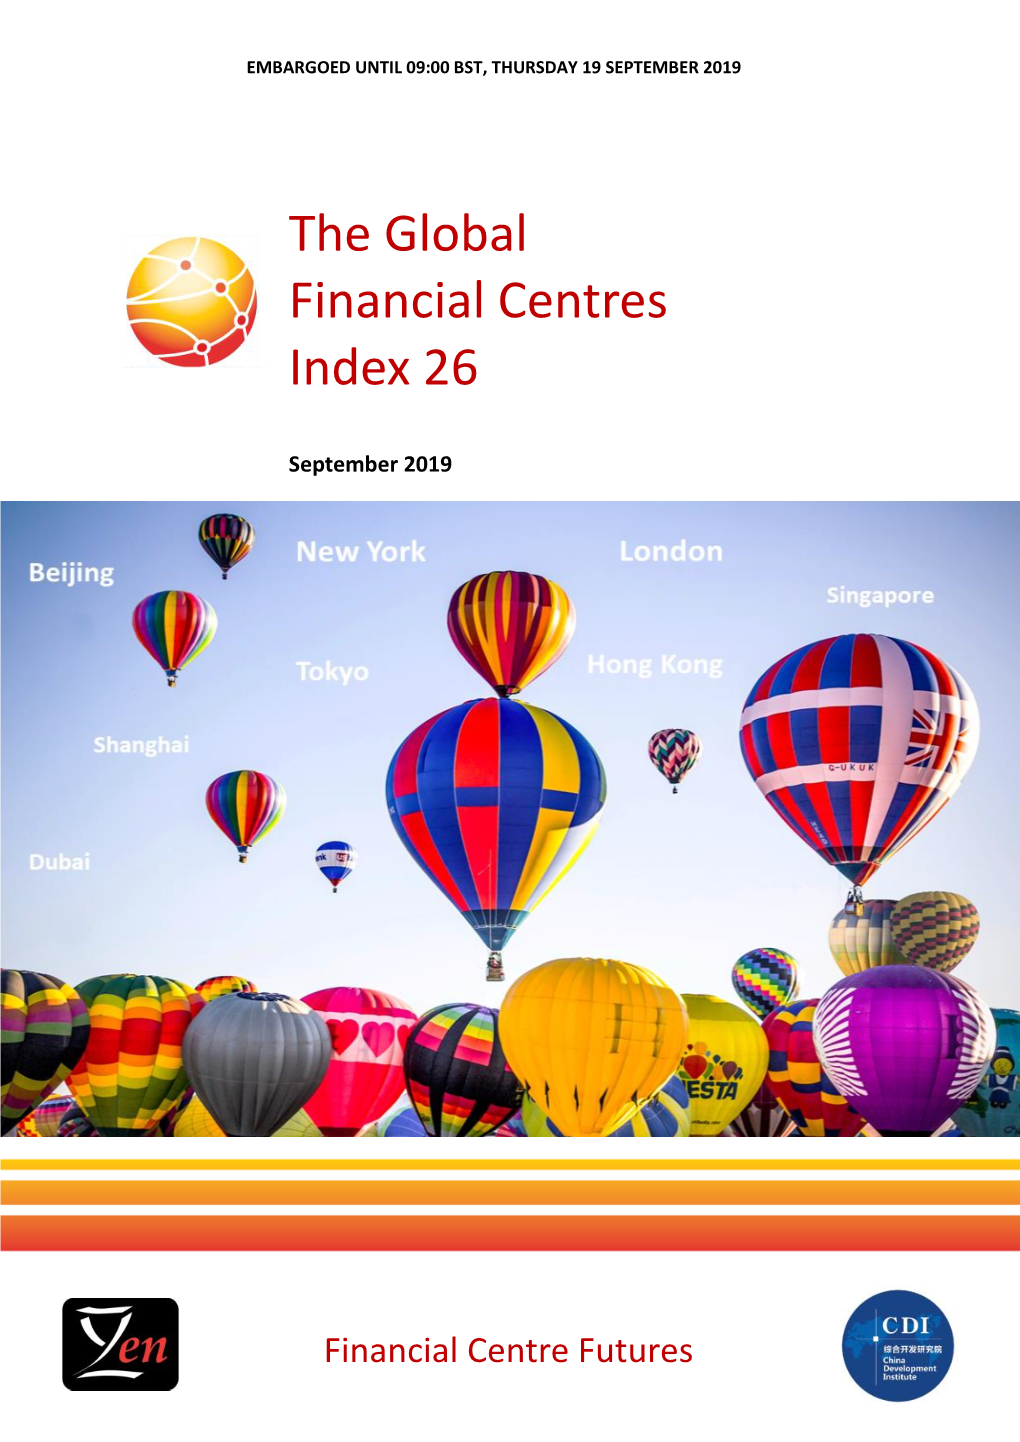 The Global Financial Centres Index 26